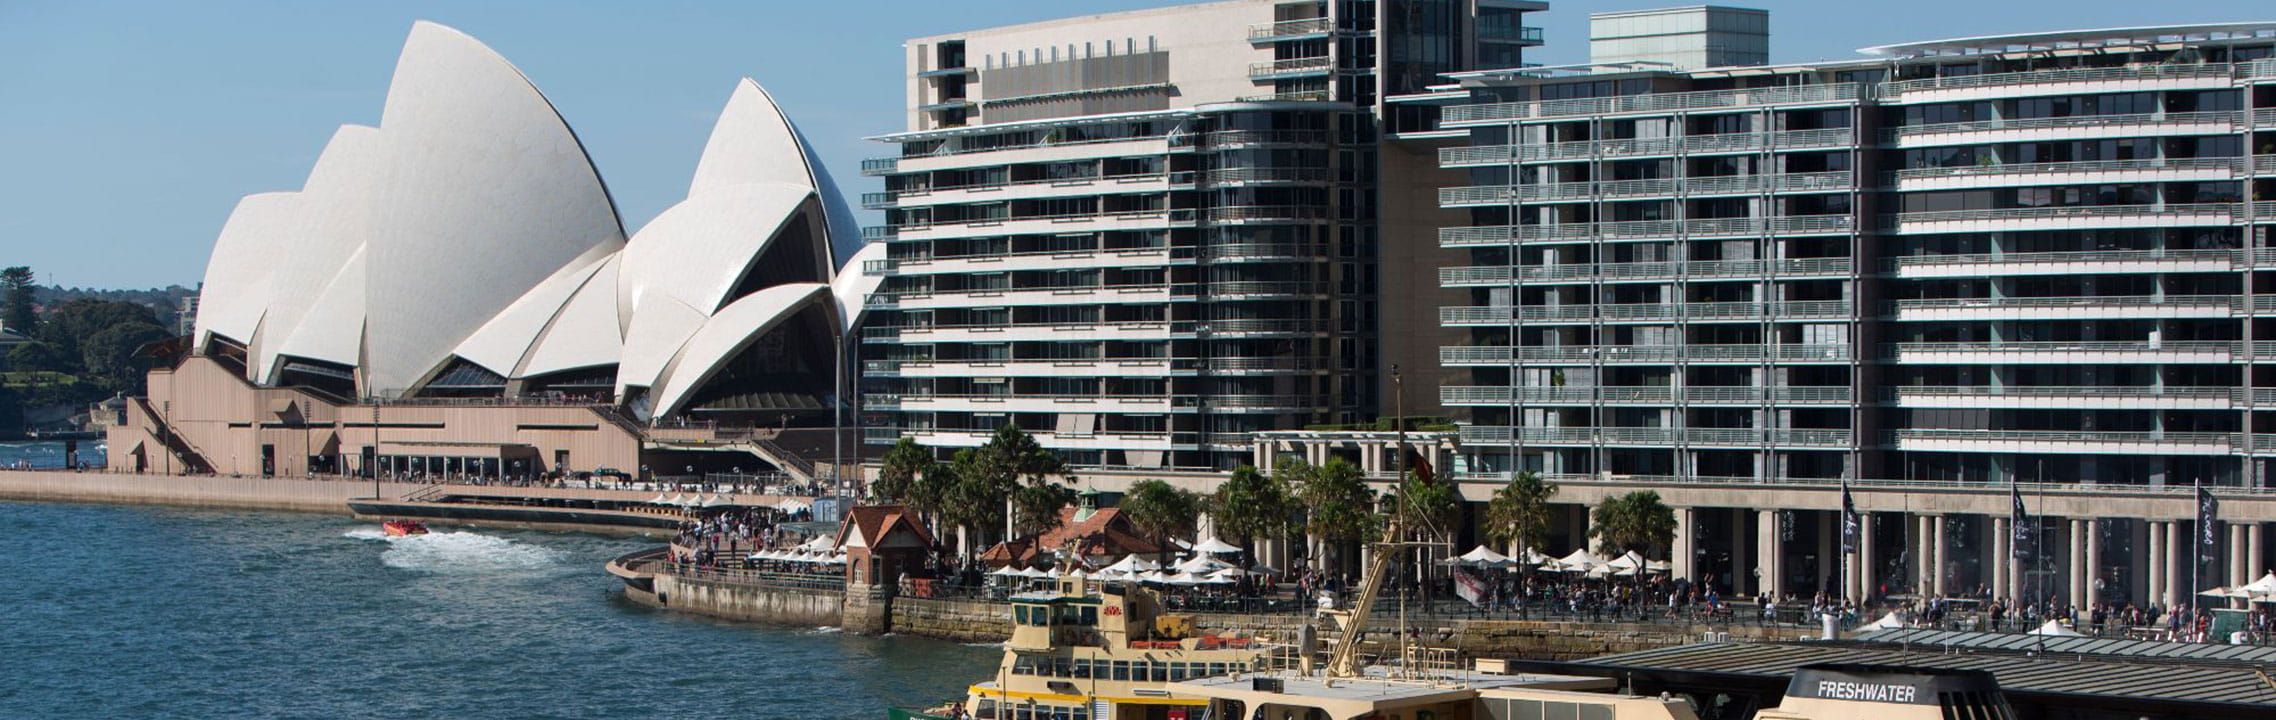 Opera House and view of Circular Quay